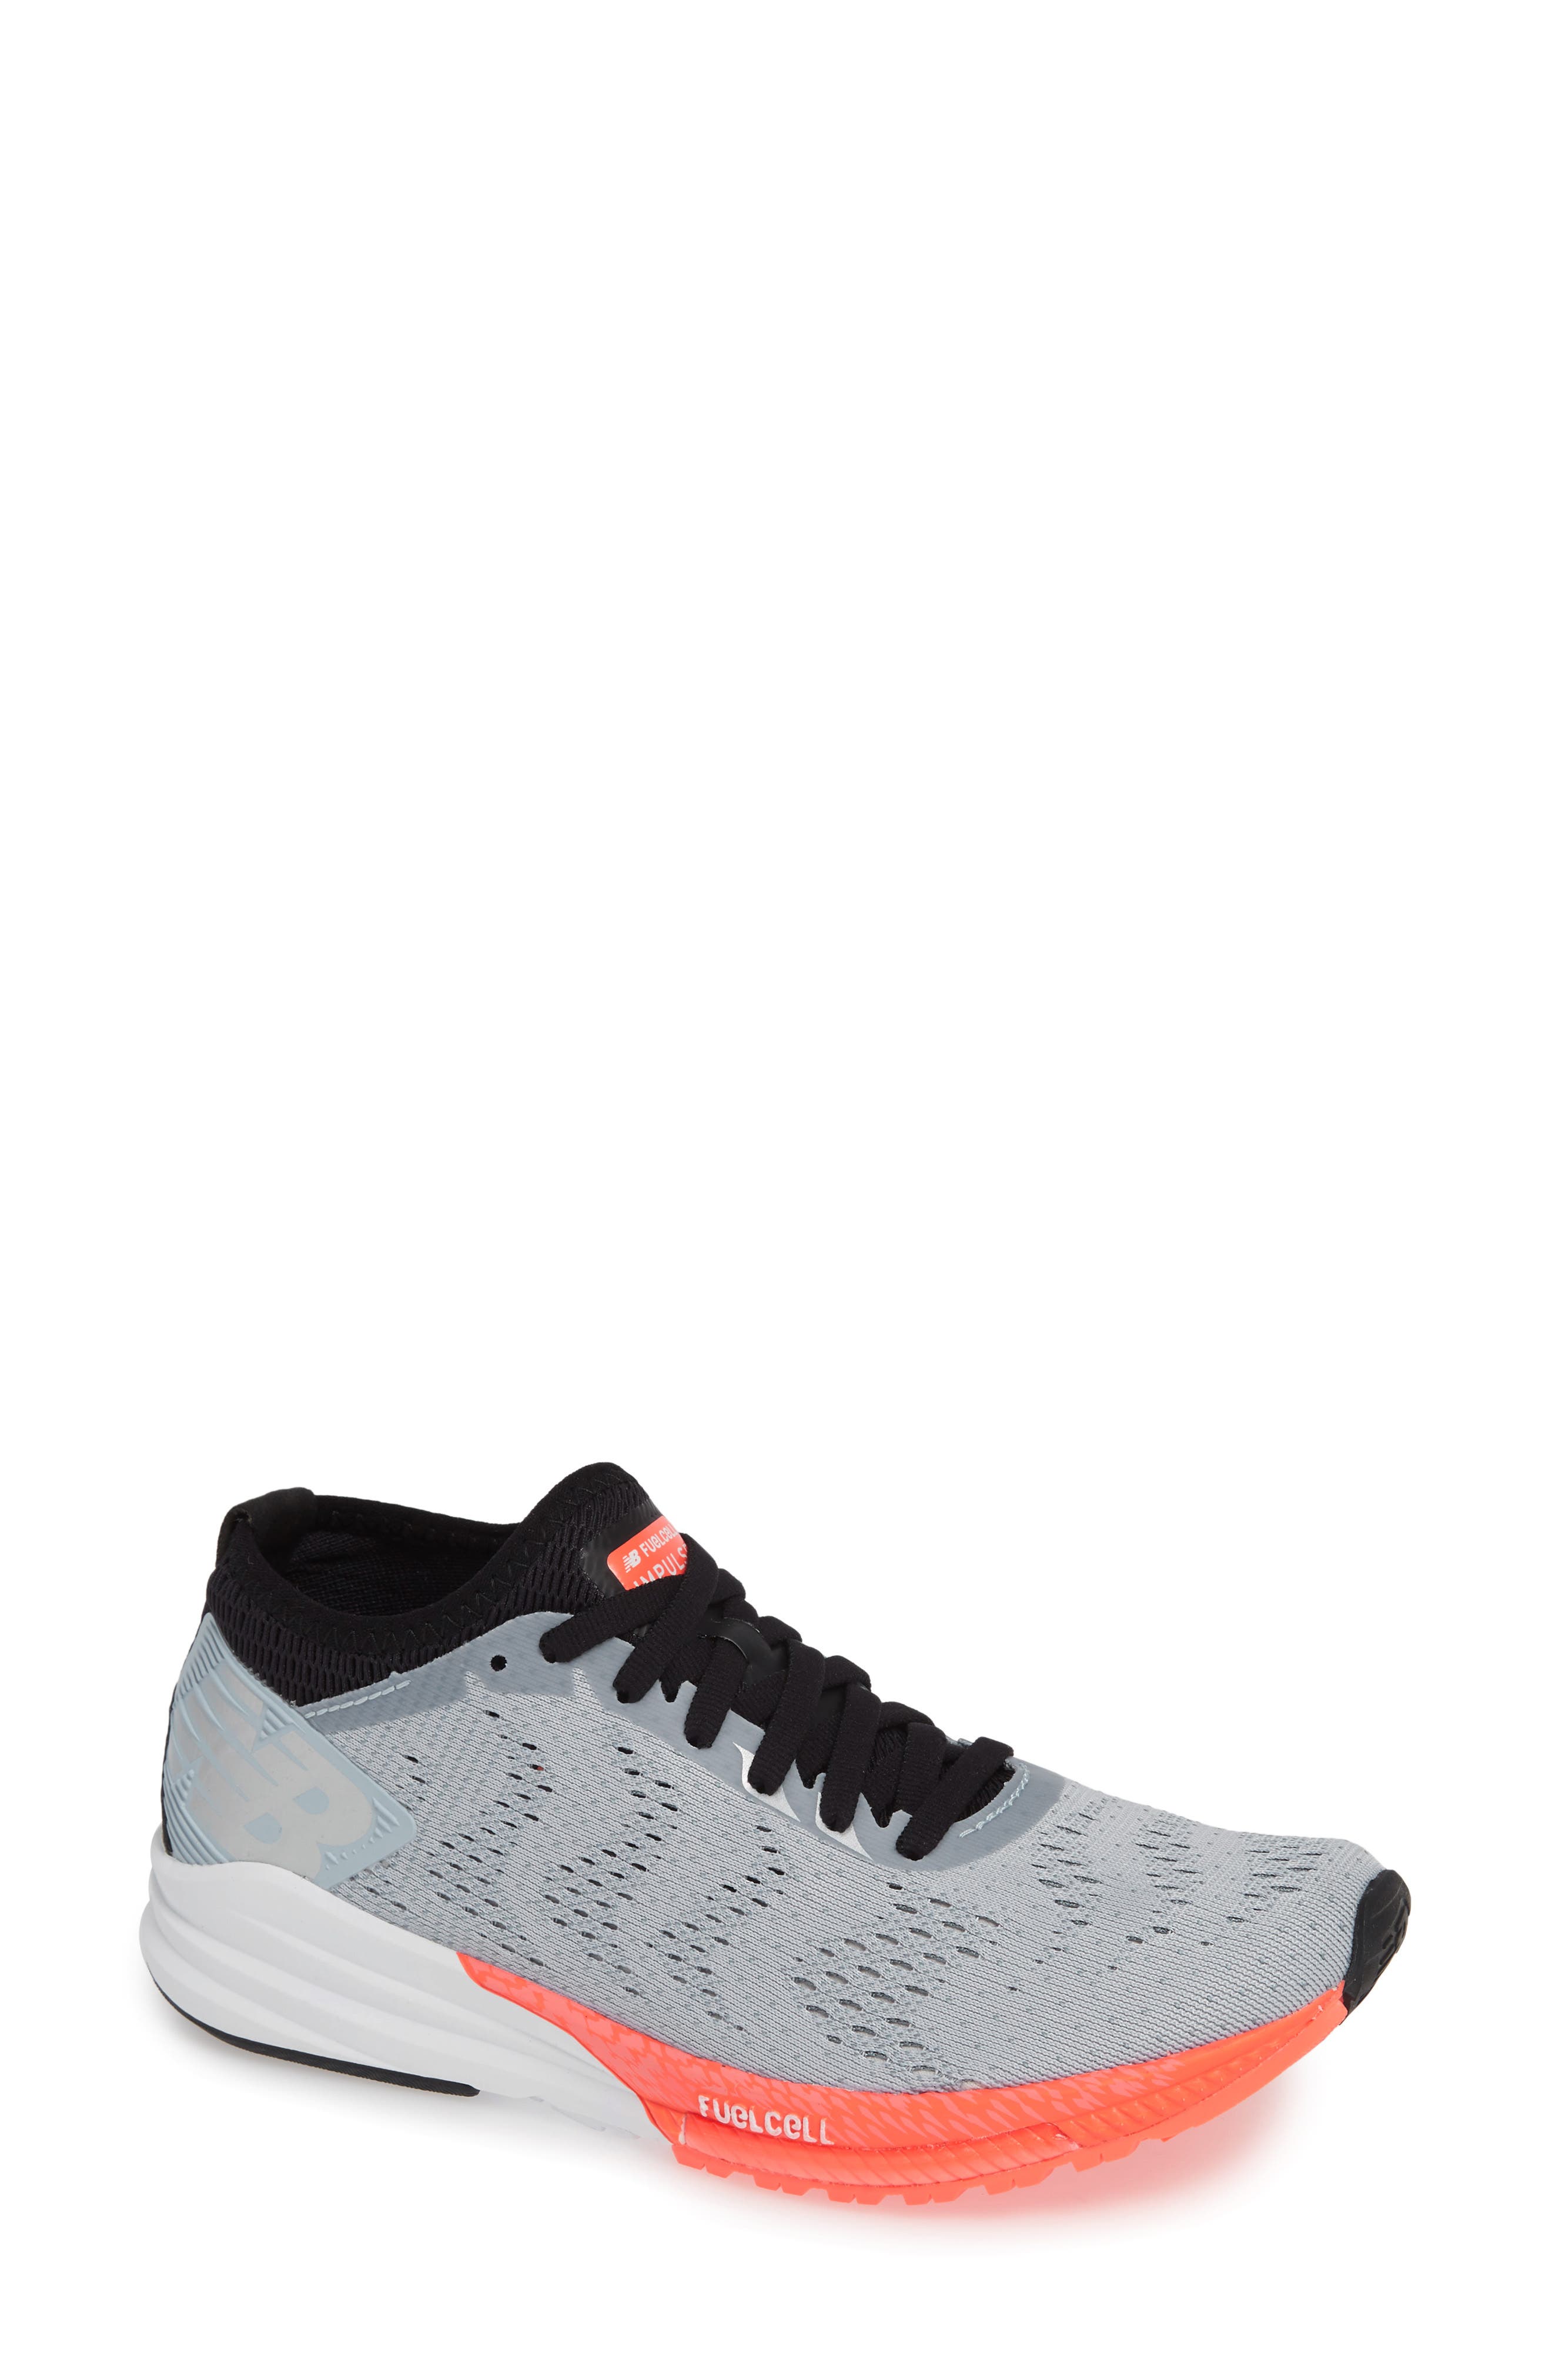 new balance fuelcell impulse womens